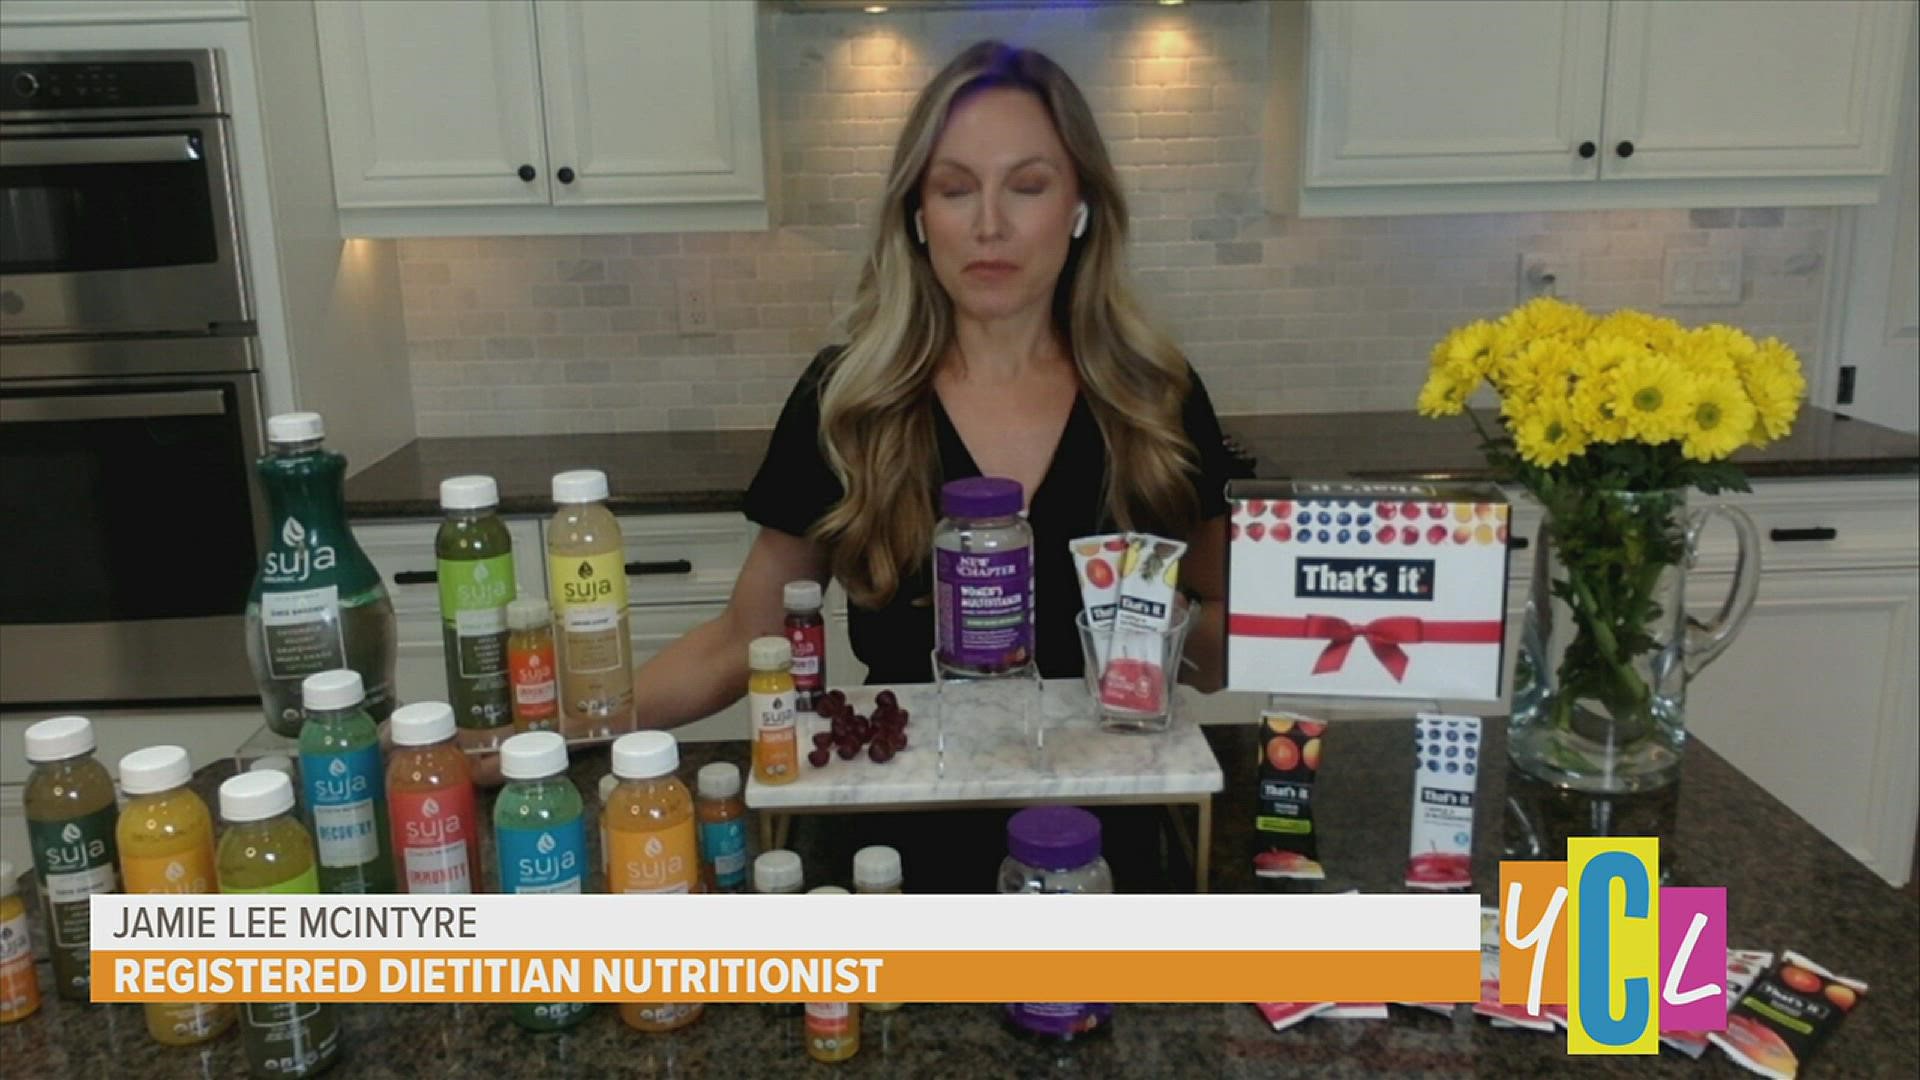 Summer's a great time to get out, and refuel with good nutrients! This segment paid for by New Chapter Vitamins, That's It., Suja juice.